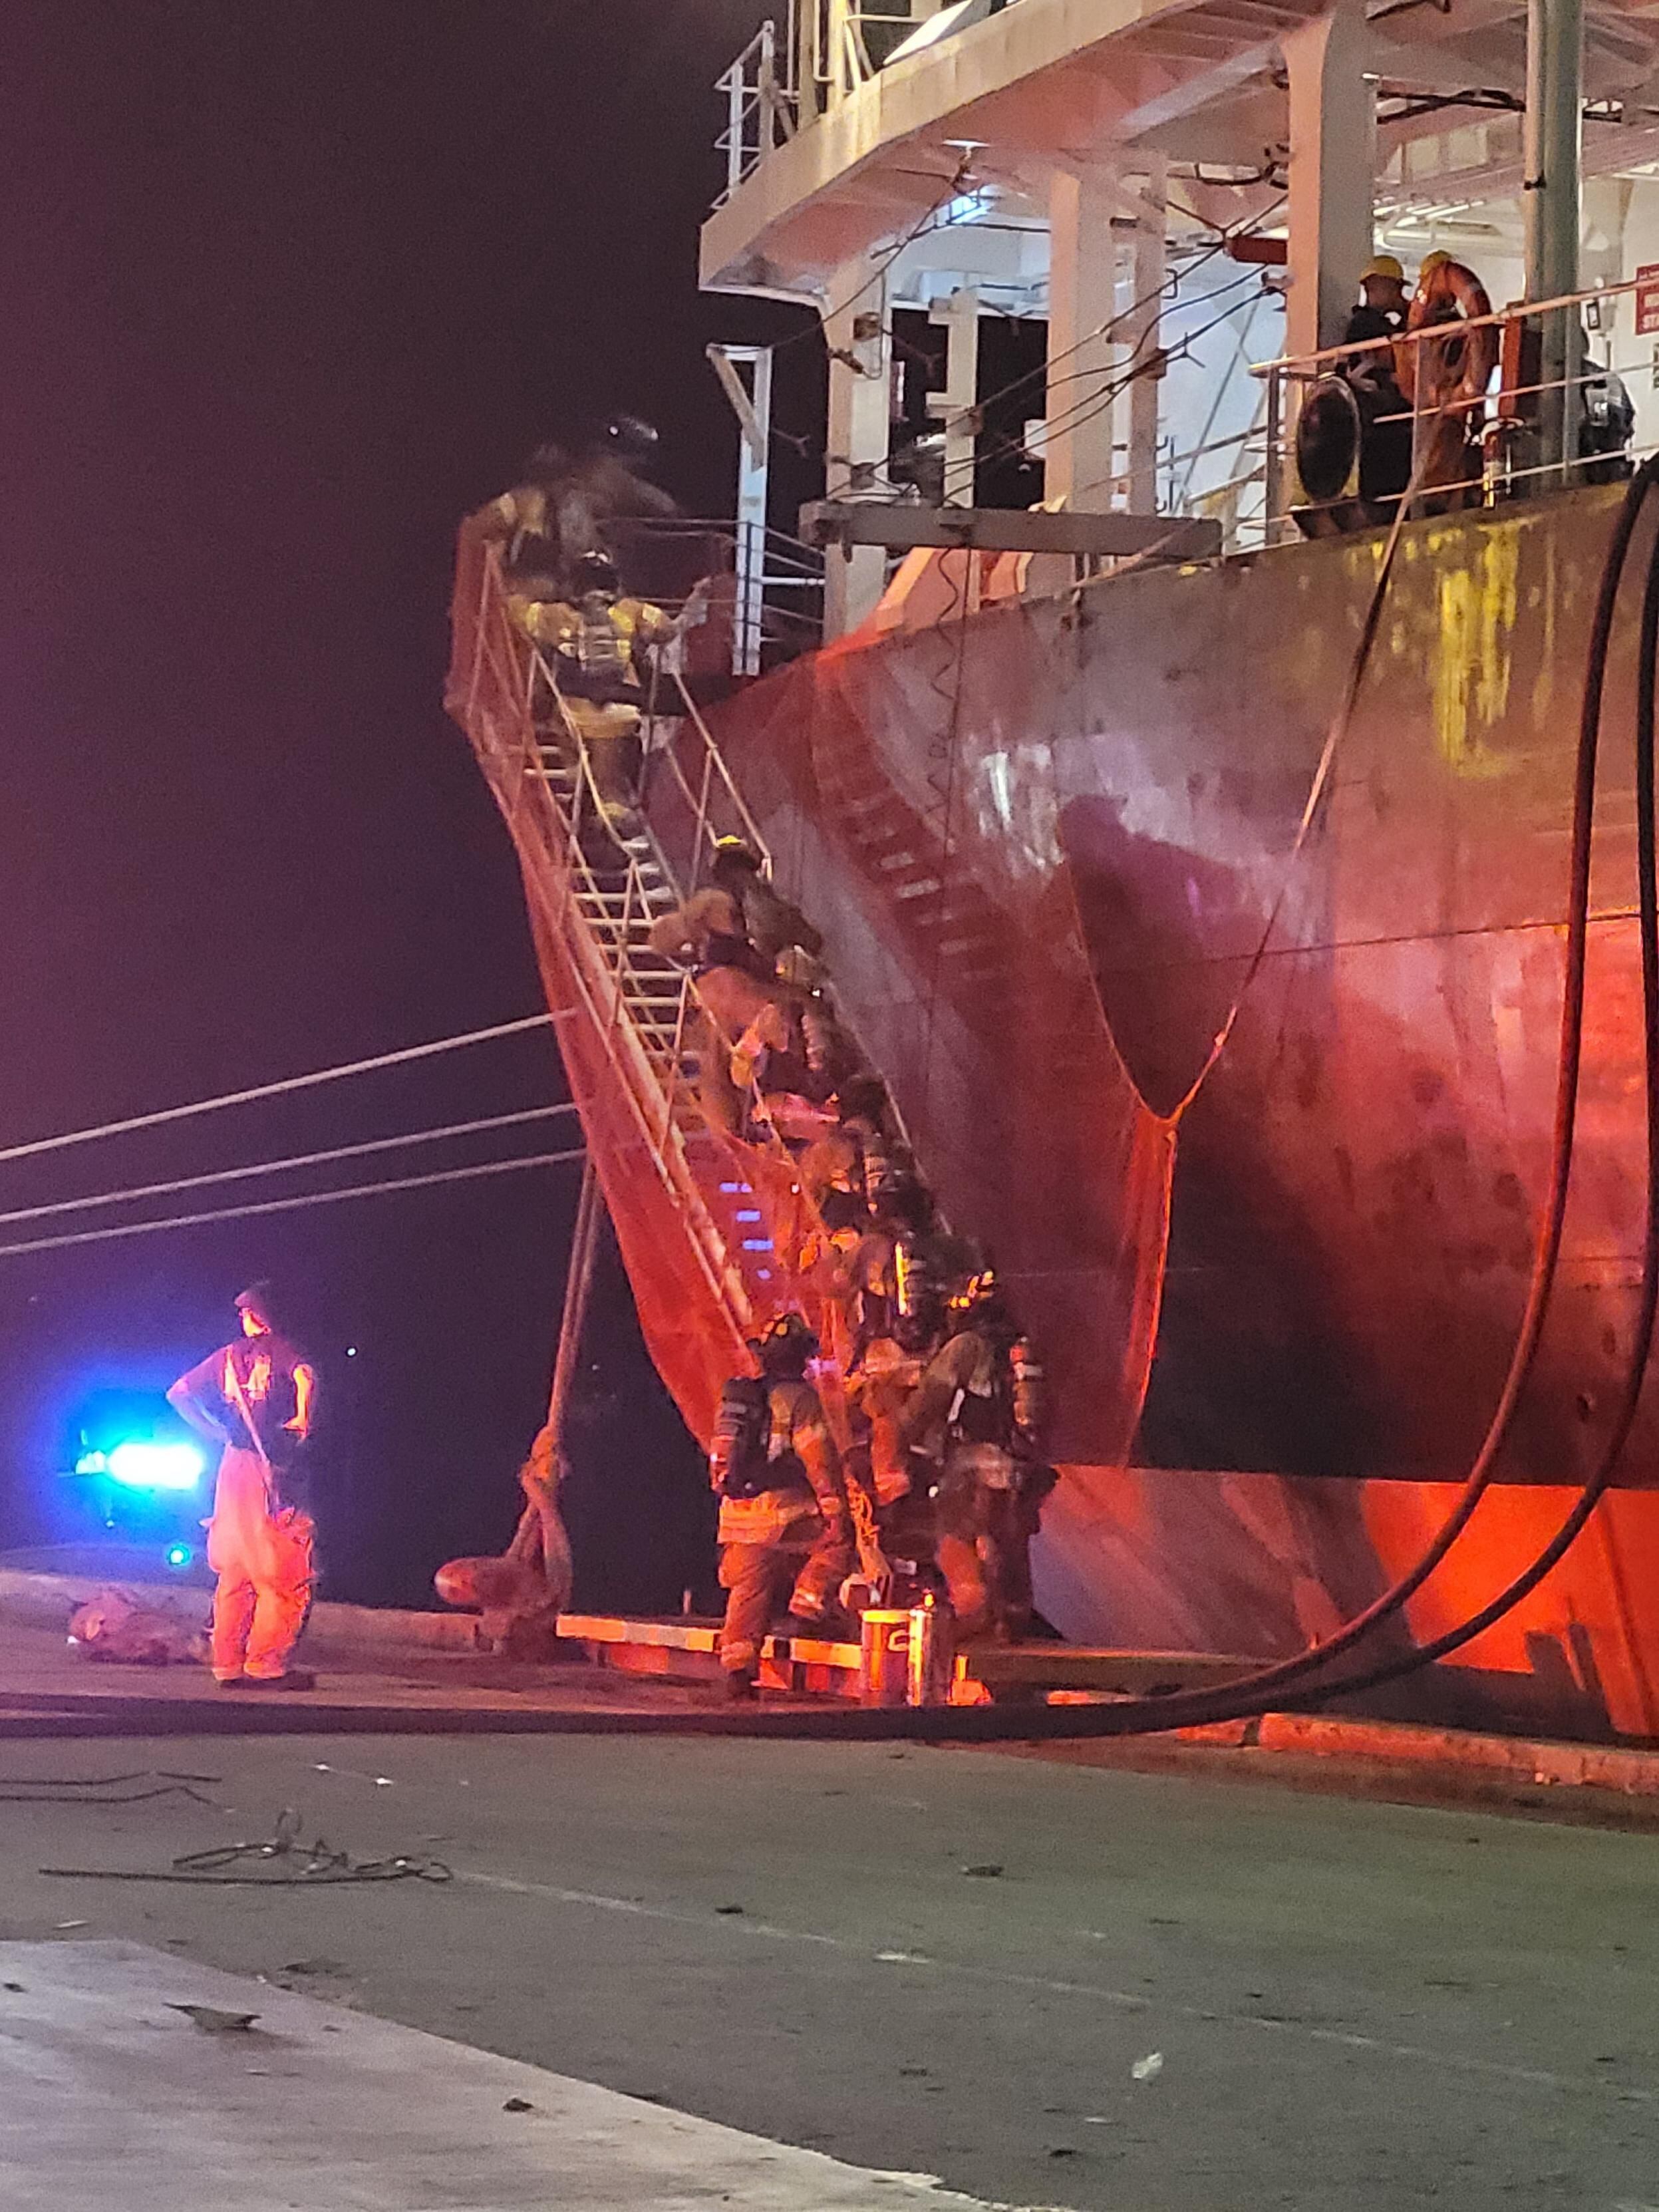 Firefighters could not enter the cargo hold to attempt to bring the fire under control.